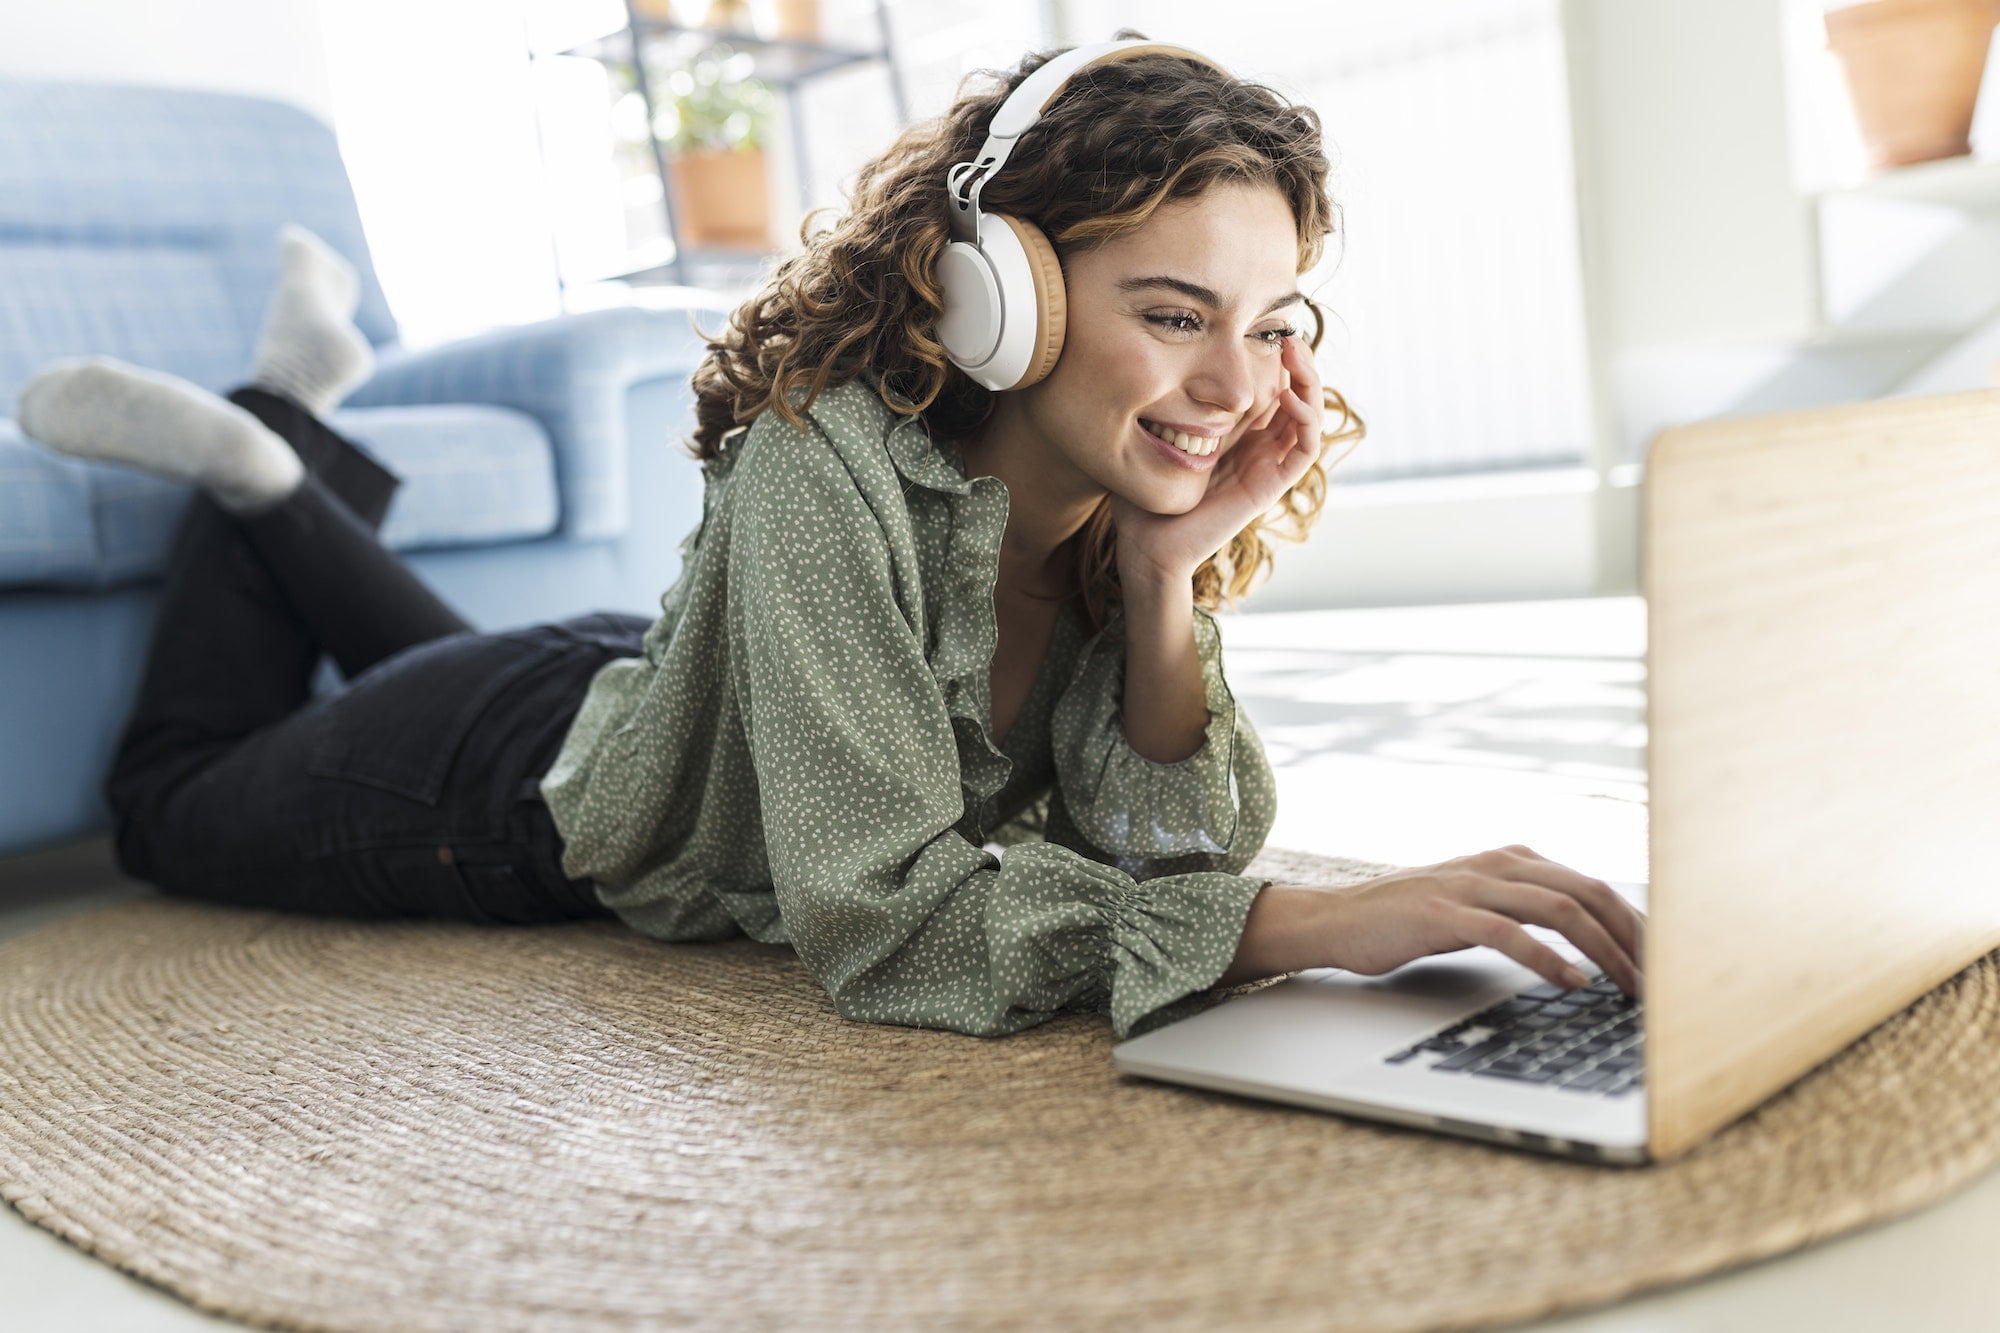 curly-haired woman lying on carpet at home using laptop, listening to music, studying.